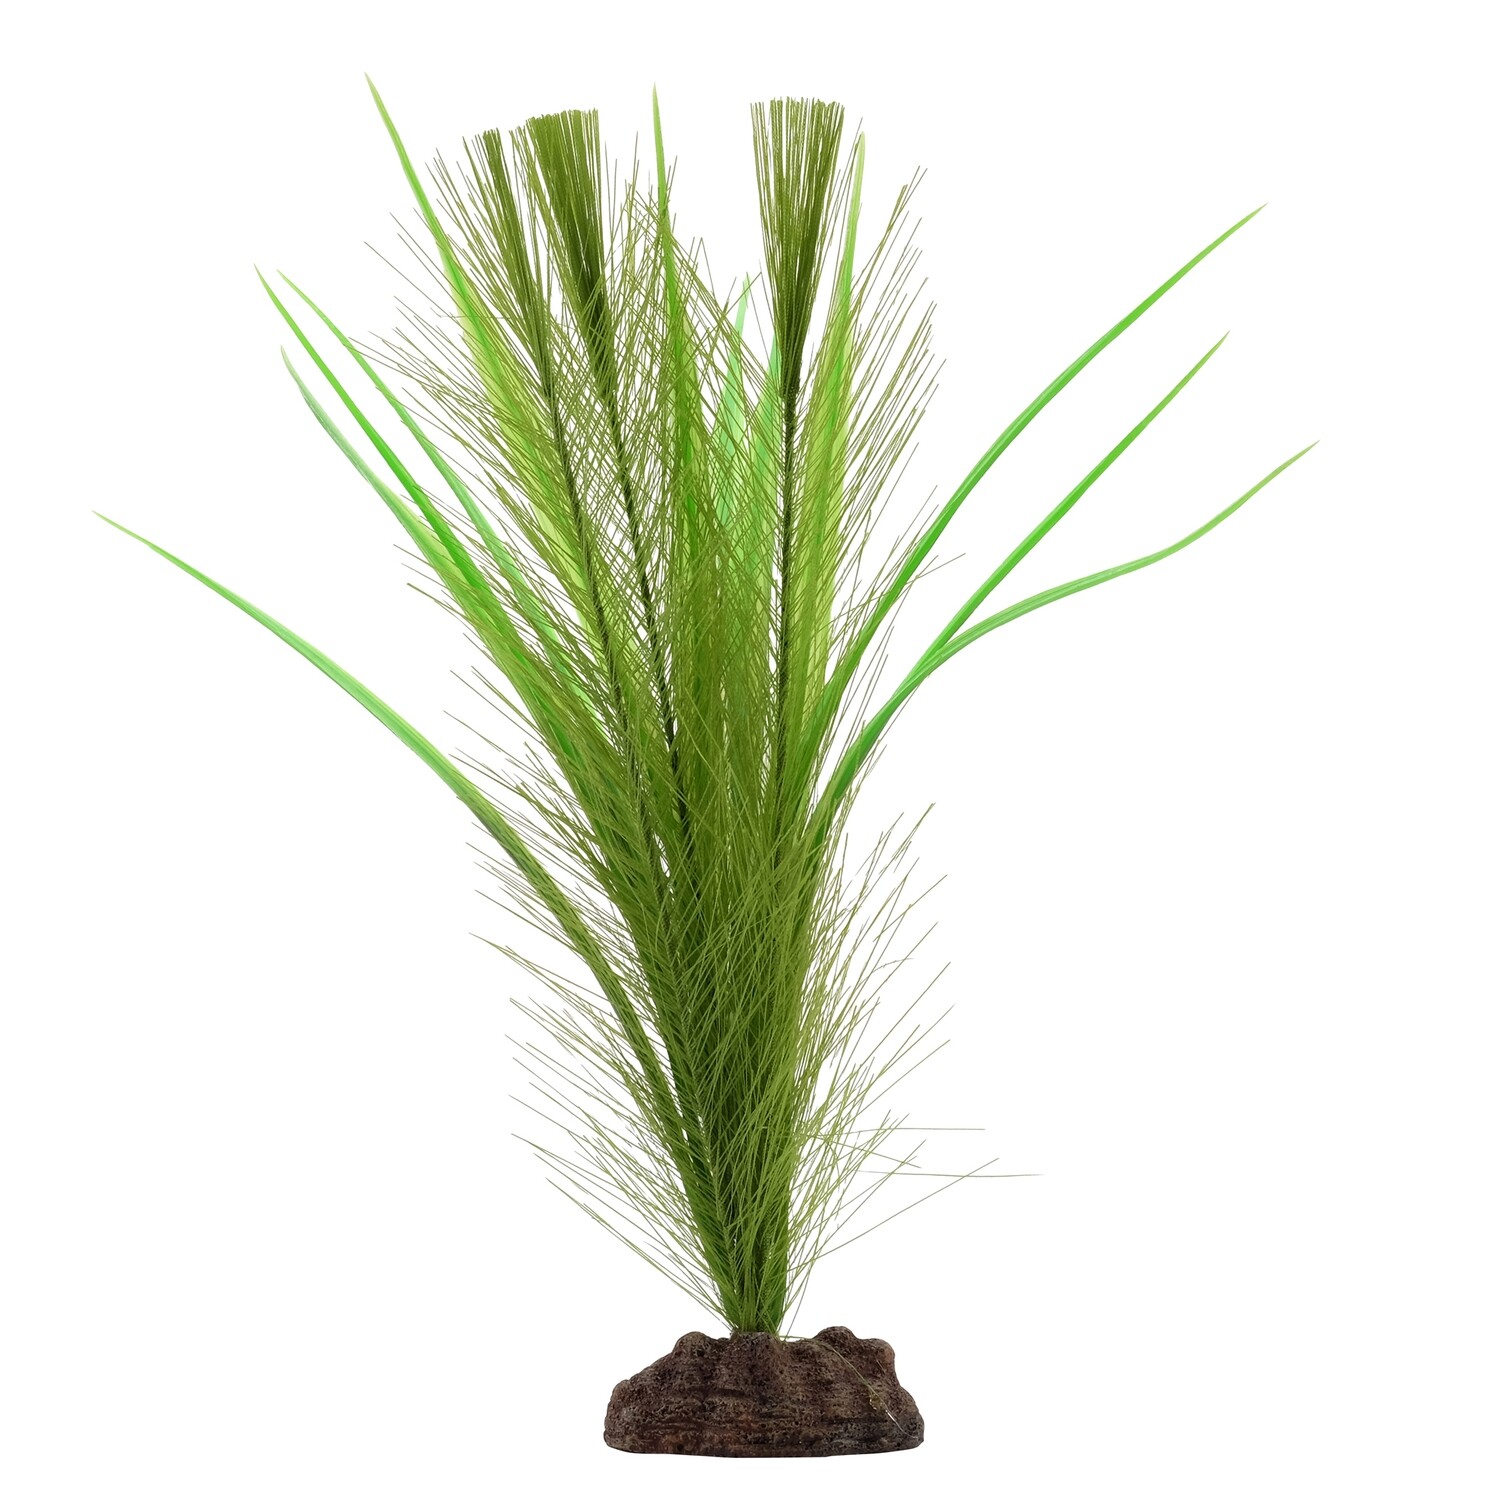 Fluval Aqualife Plant Scapes Green Parrot&#39;s Feather/ Vallisneria Plant Mix - 30.5 cm (12 in)